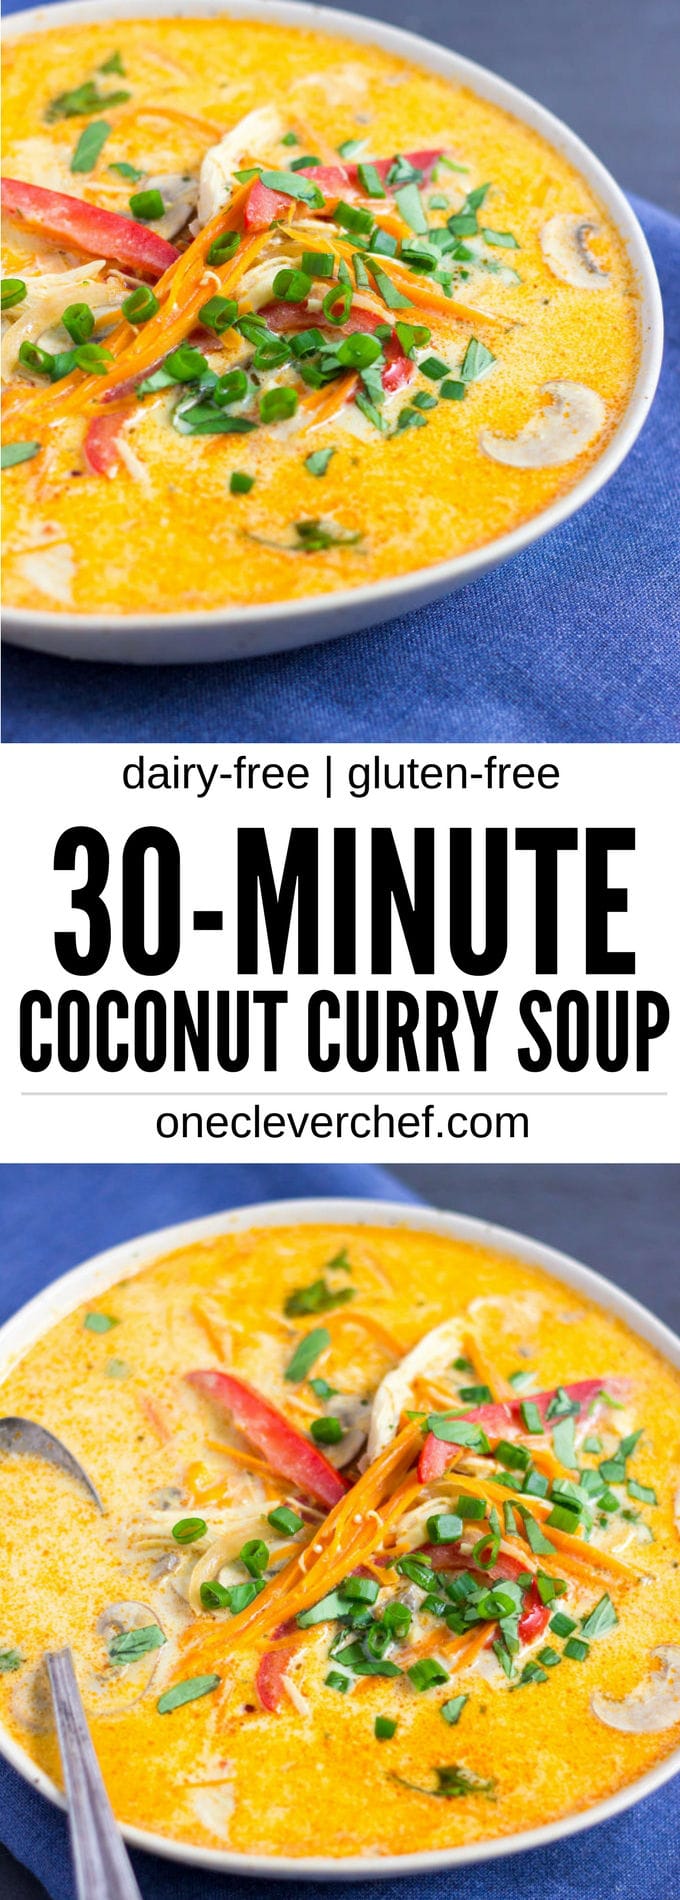 This Coconut Curry Chicken Soup with Quinoa is easy to make, healthy and ready in under 30 minutes. King of the thai comfort foods, this delicious red curry soup is full of veggies, gluten-free, and can be made paleo, vegan and low-carb with a few simple ingredient swaps. 